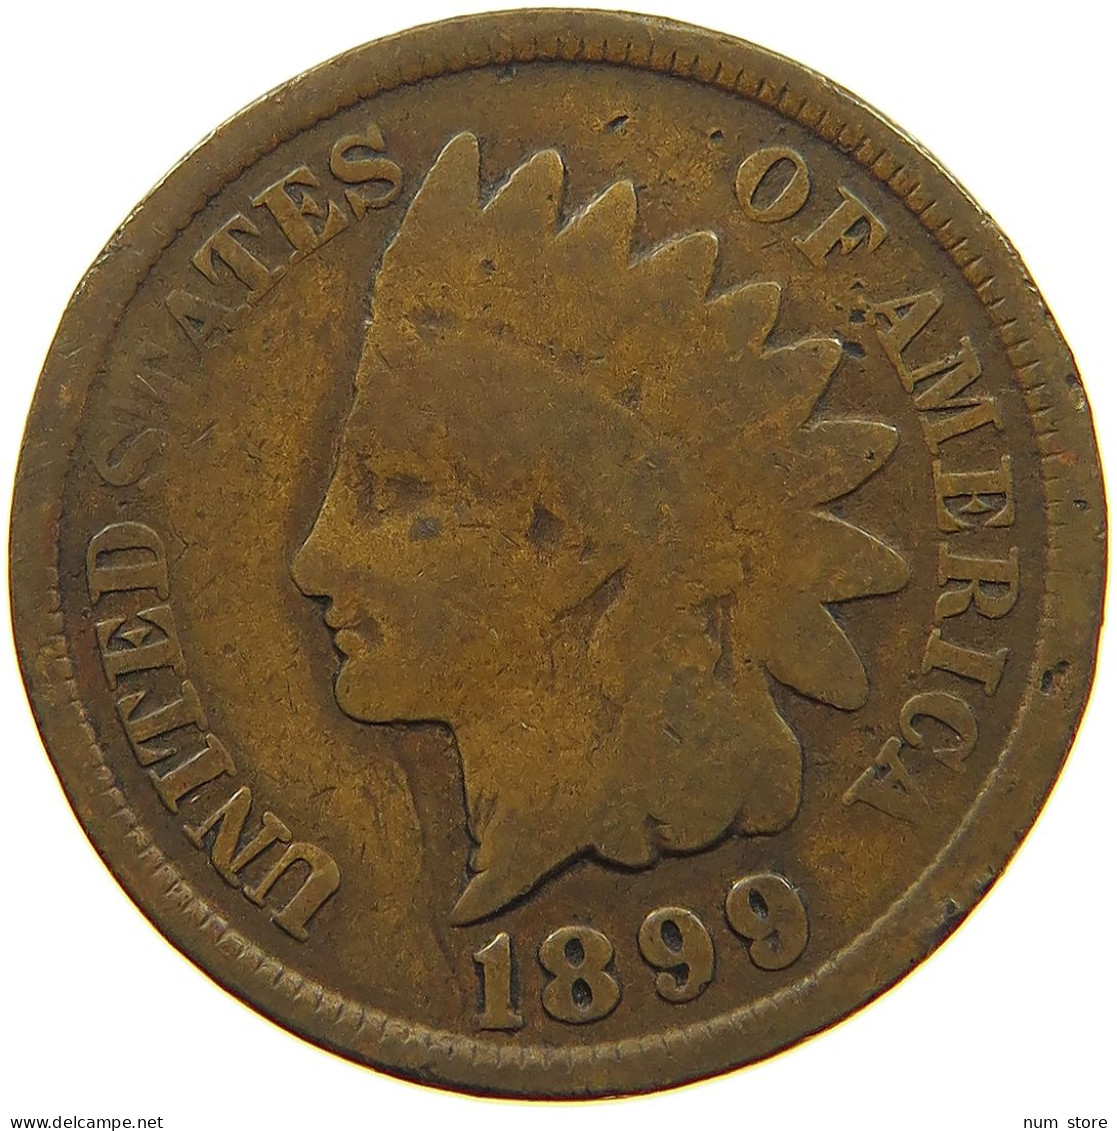 UNITED STATES OF AMERICA CENT 1899 INDIAN HEAD #s063 0439 - 1859-1909: Indian Head